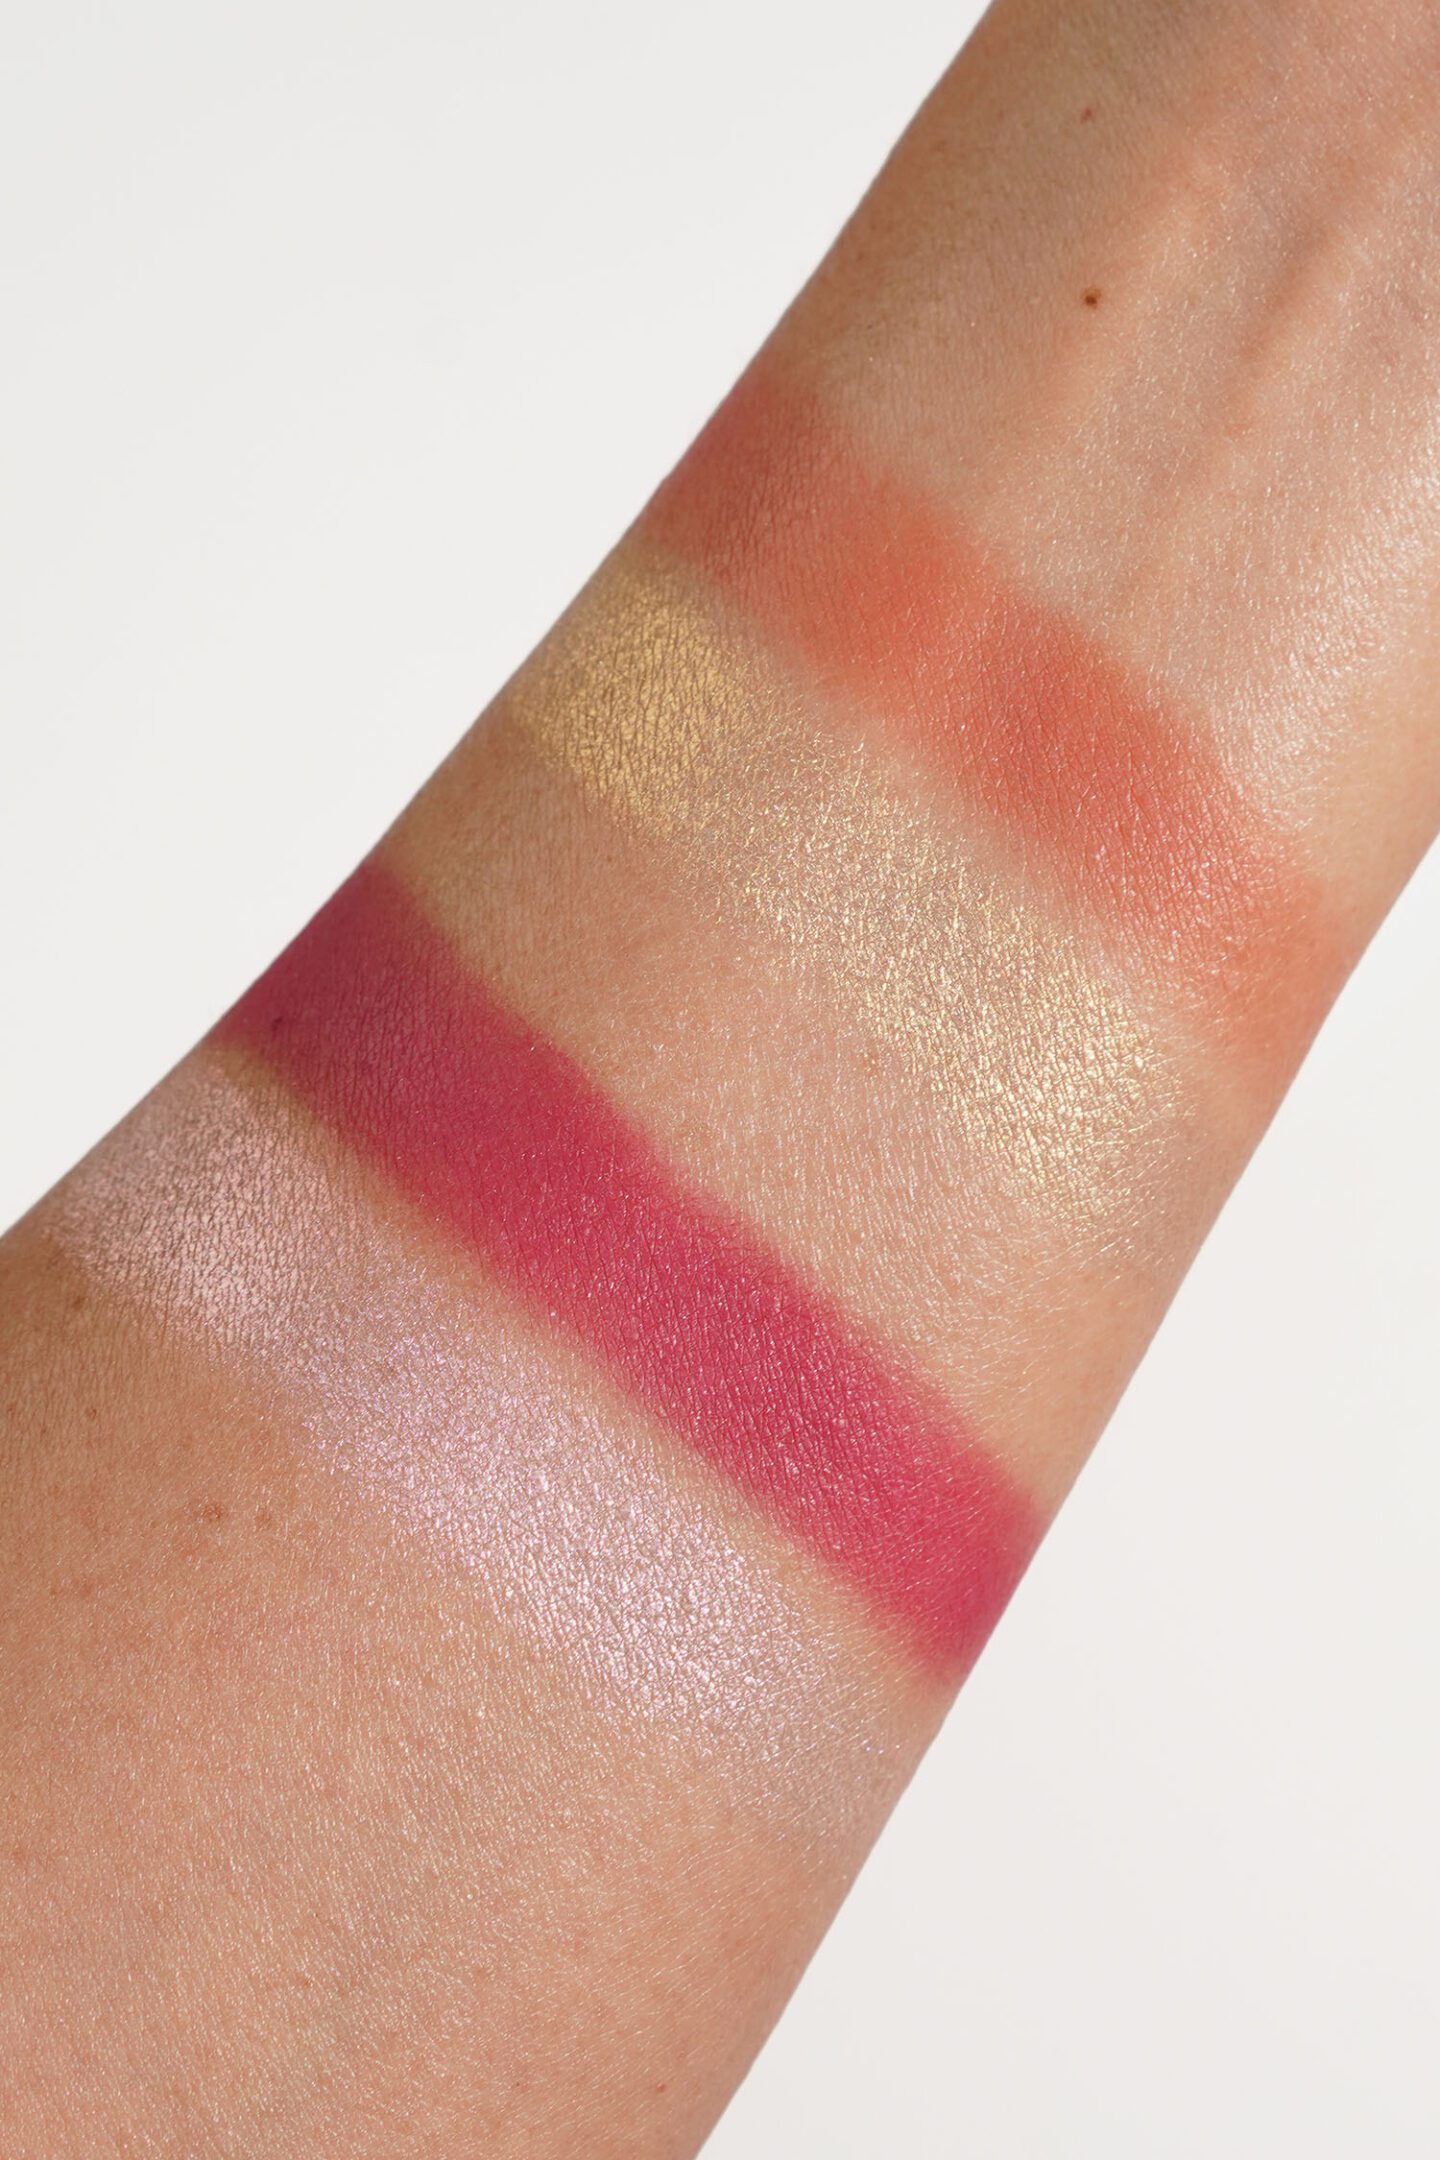 Chanel Jardin Imaginaire Blush and Highlighter Duos Gold Peach and Light Berry swatches